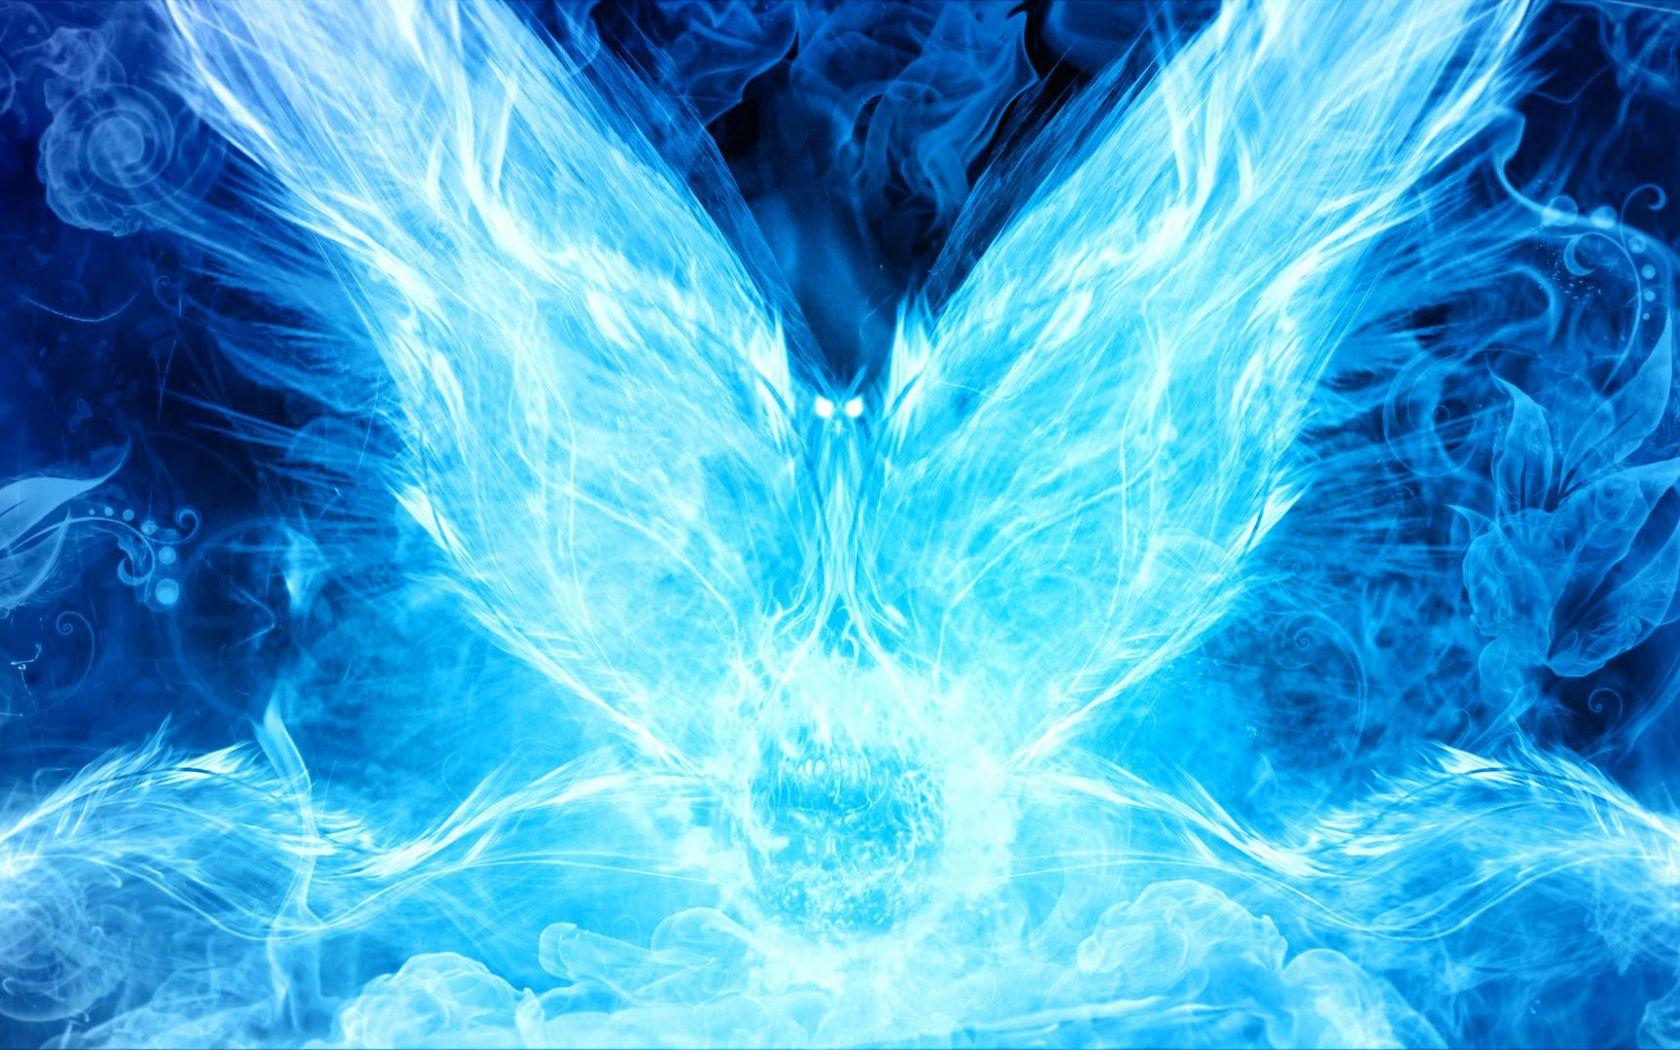 Anime Blue Fire Wallpapers - Top Free Anime Blue Fire Backgrounds ...